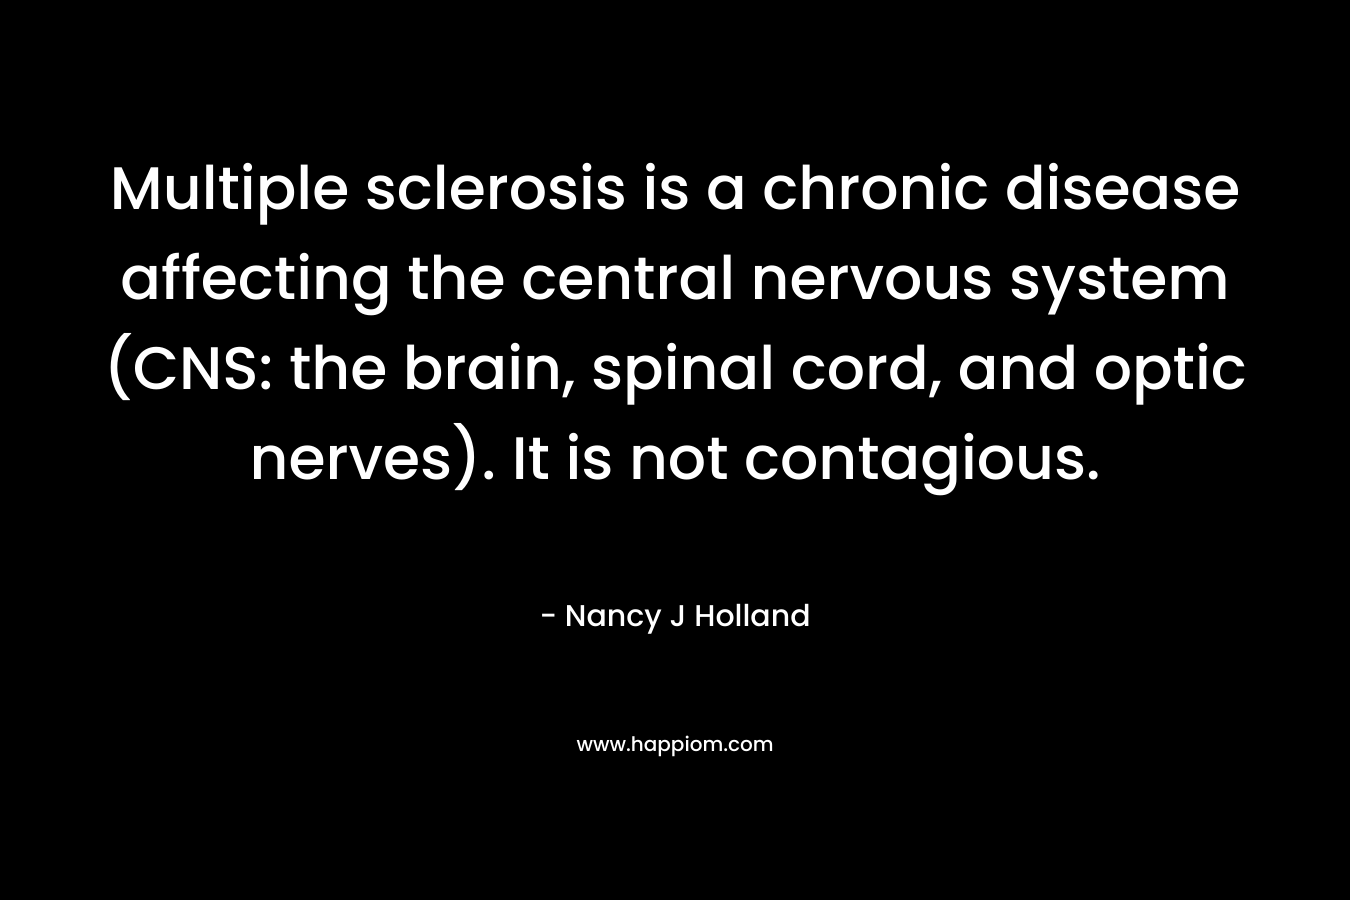 Multiple sclerosis is a chronic disease affecting the central nervous system (CNS: the brain, spinal cord, and optic nerves). It is not contagious. – Nancy J Holland